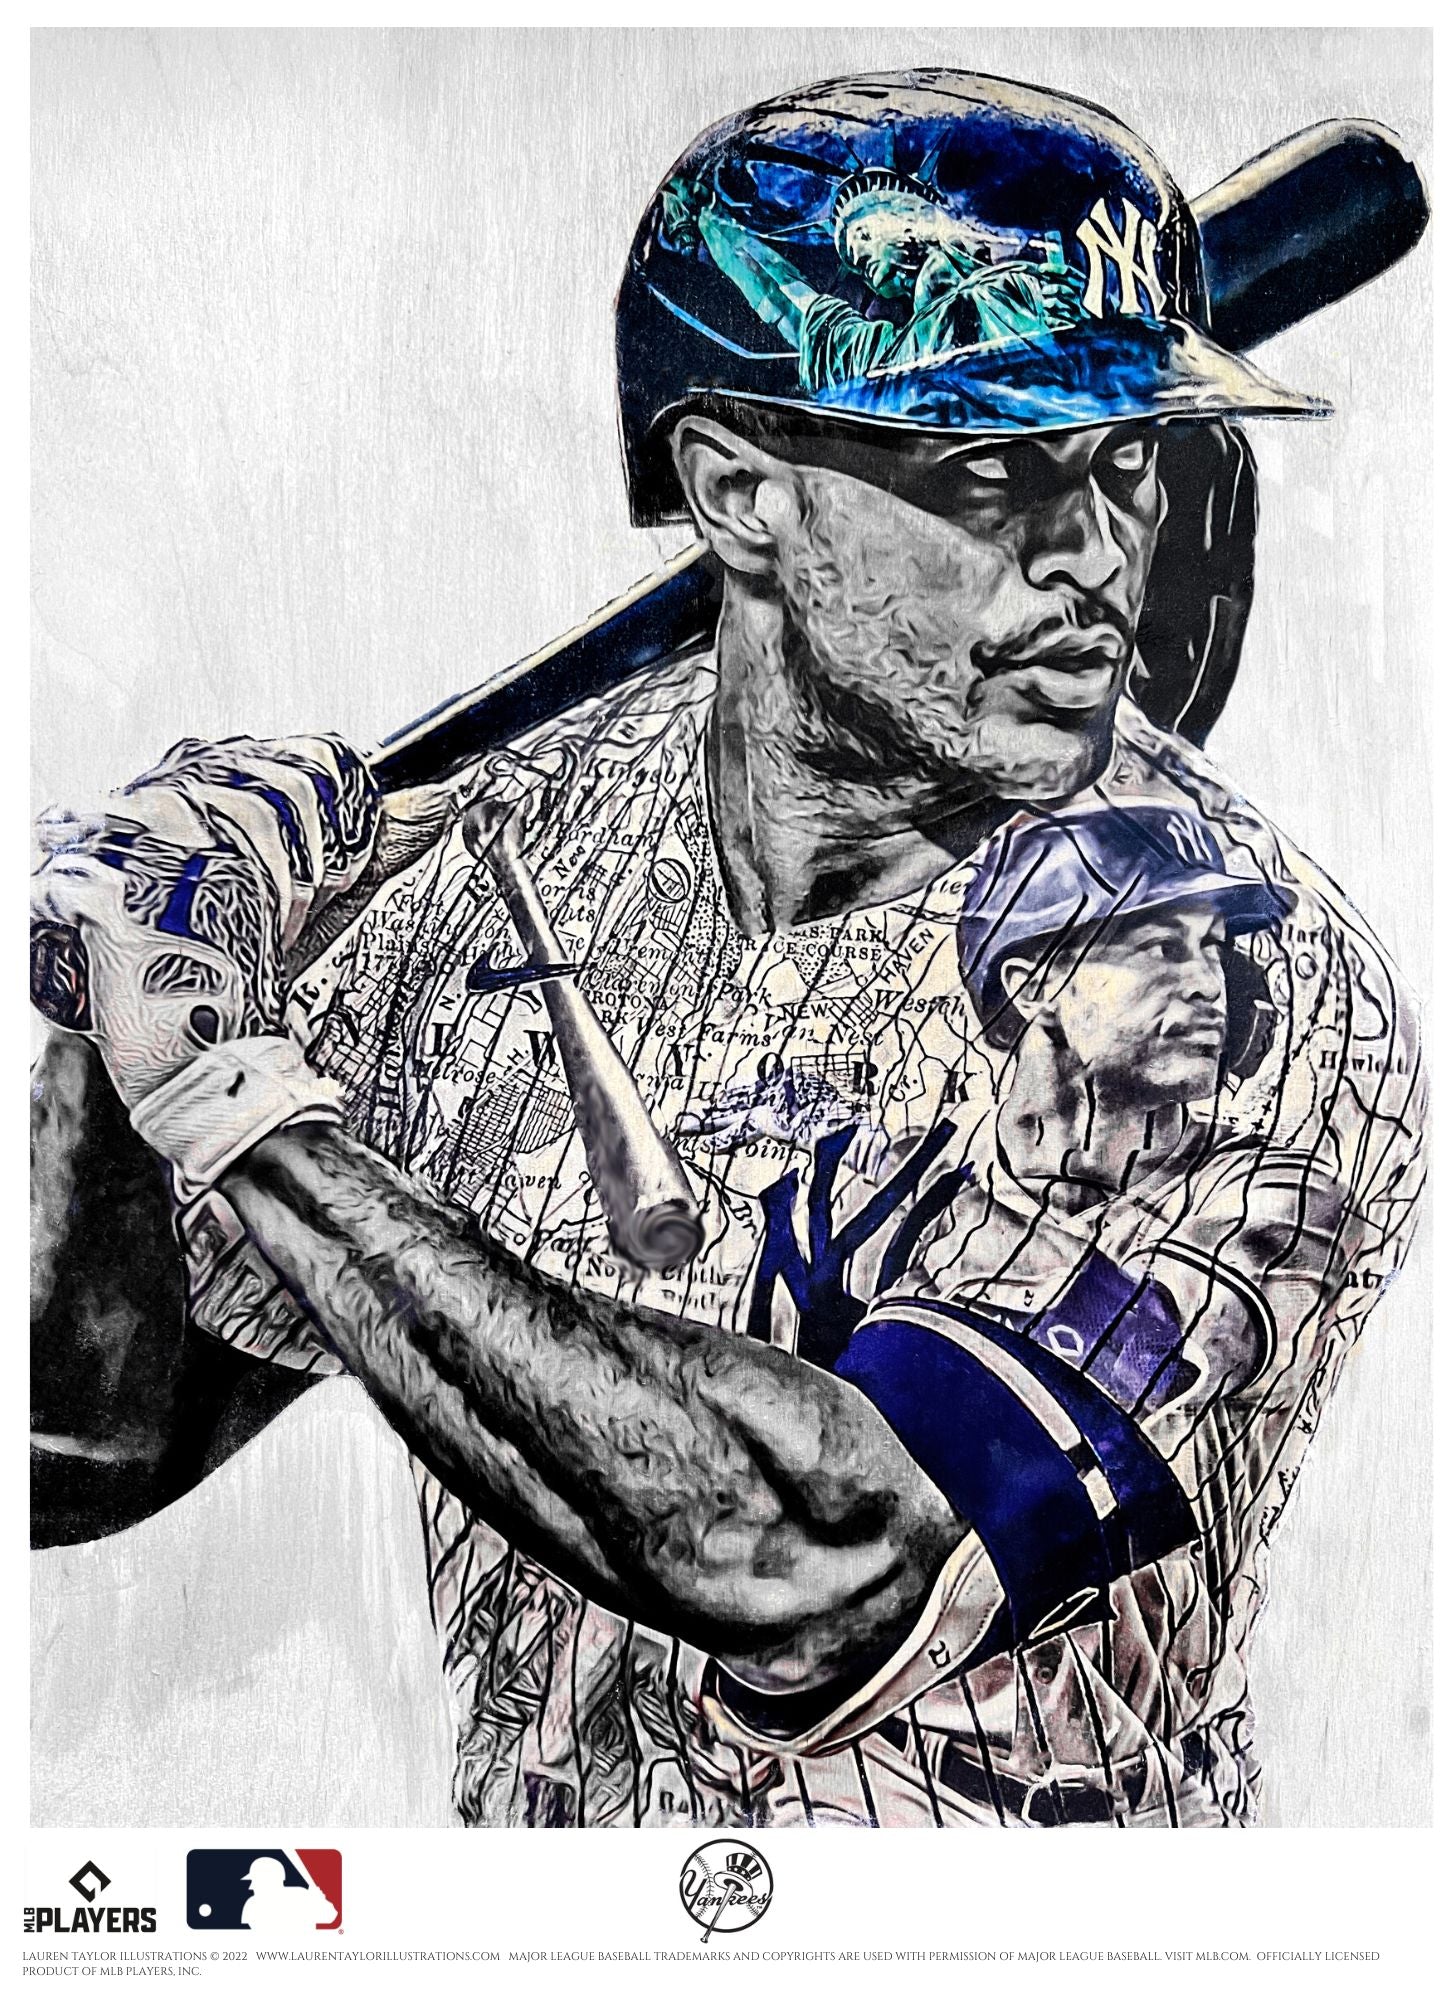 "Stanton" (Giancarlo Stanton) New York Yankees - Officially Licensed MLB Print - Limited Release /500